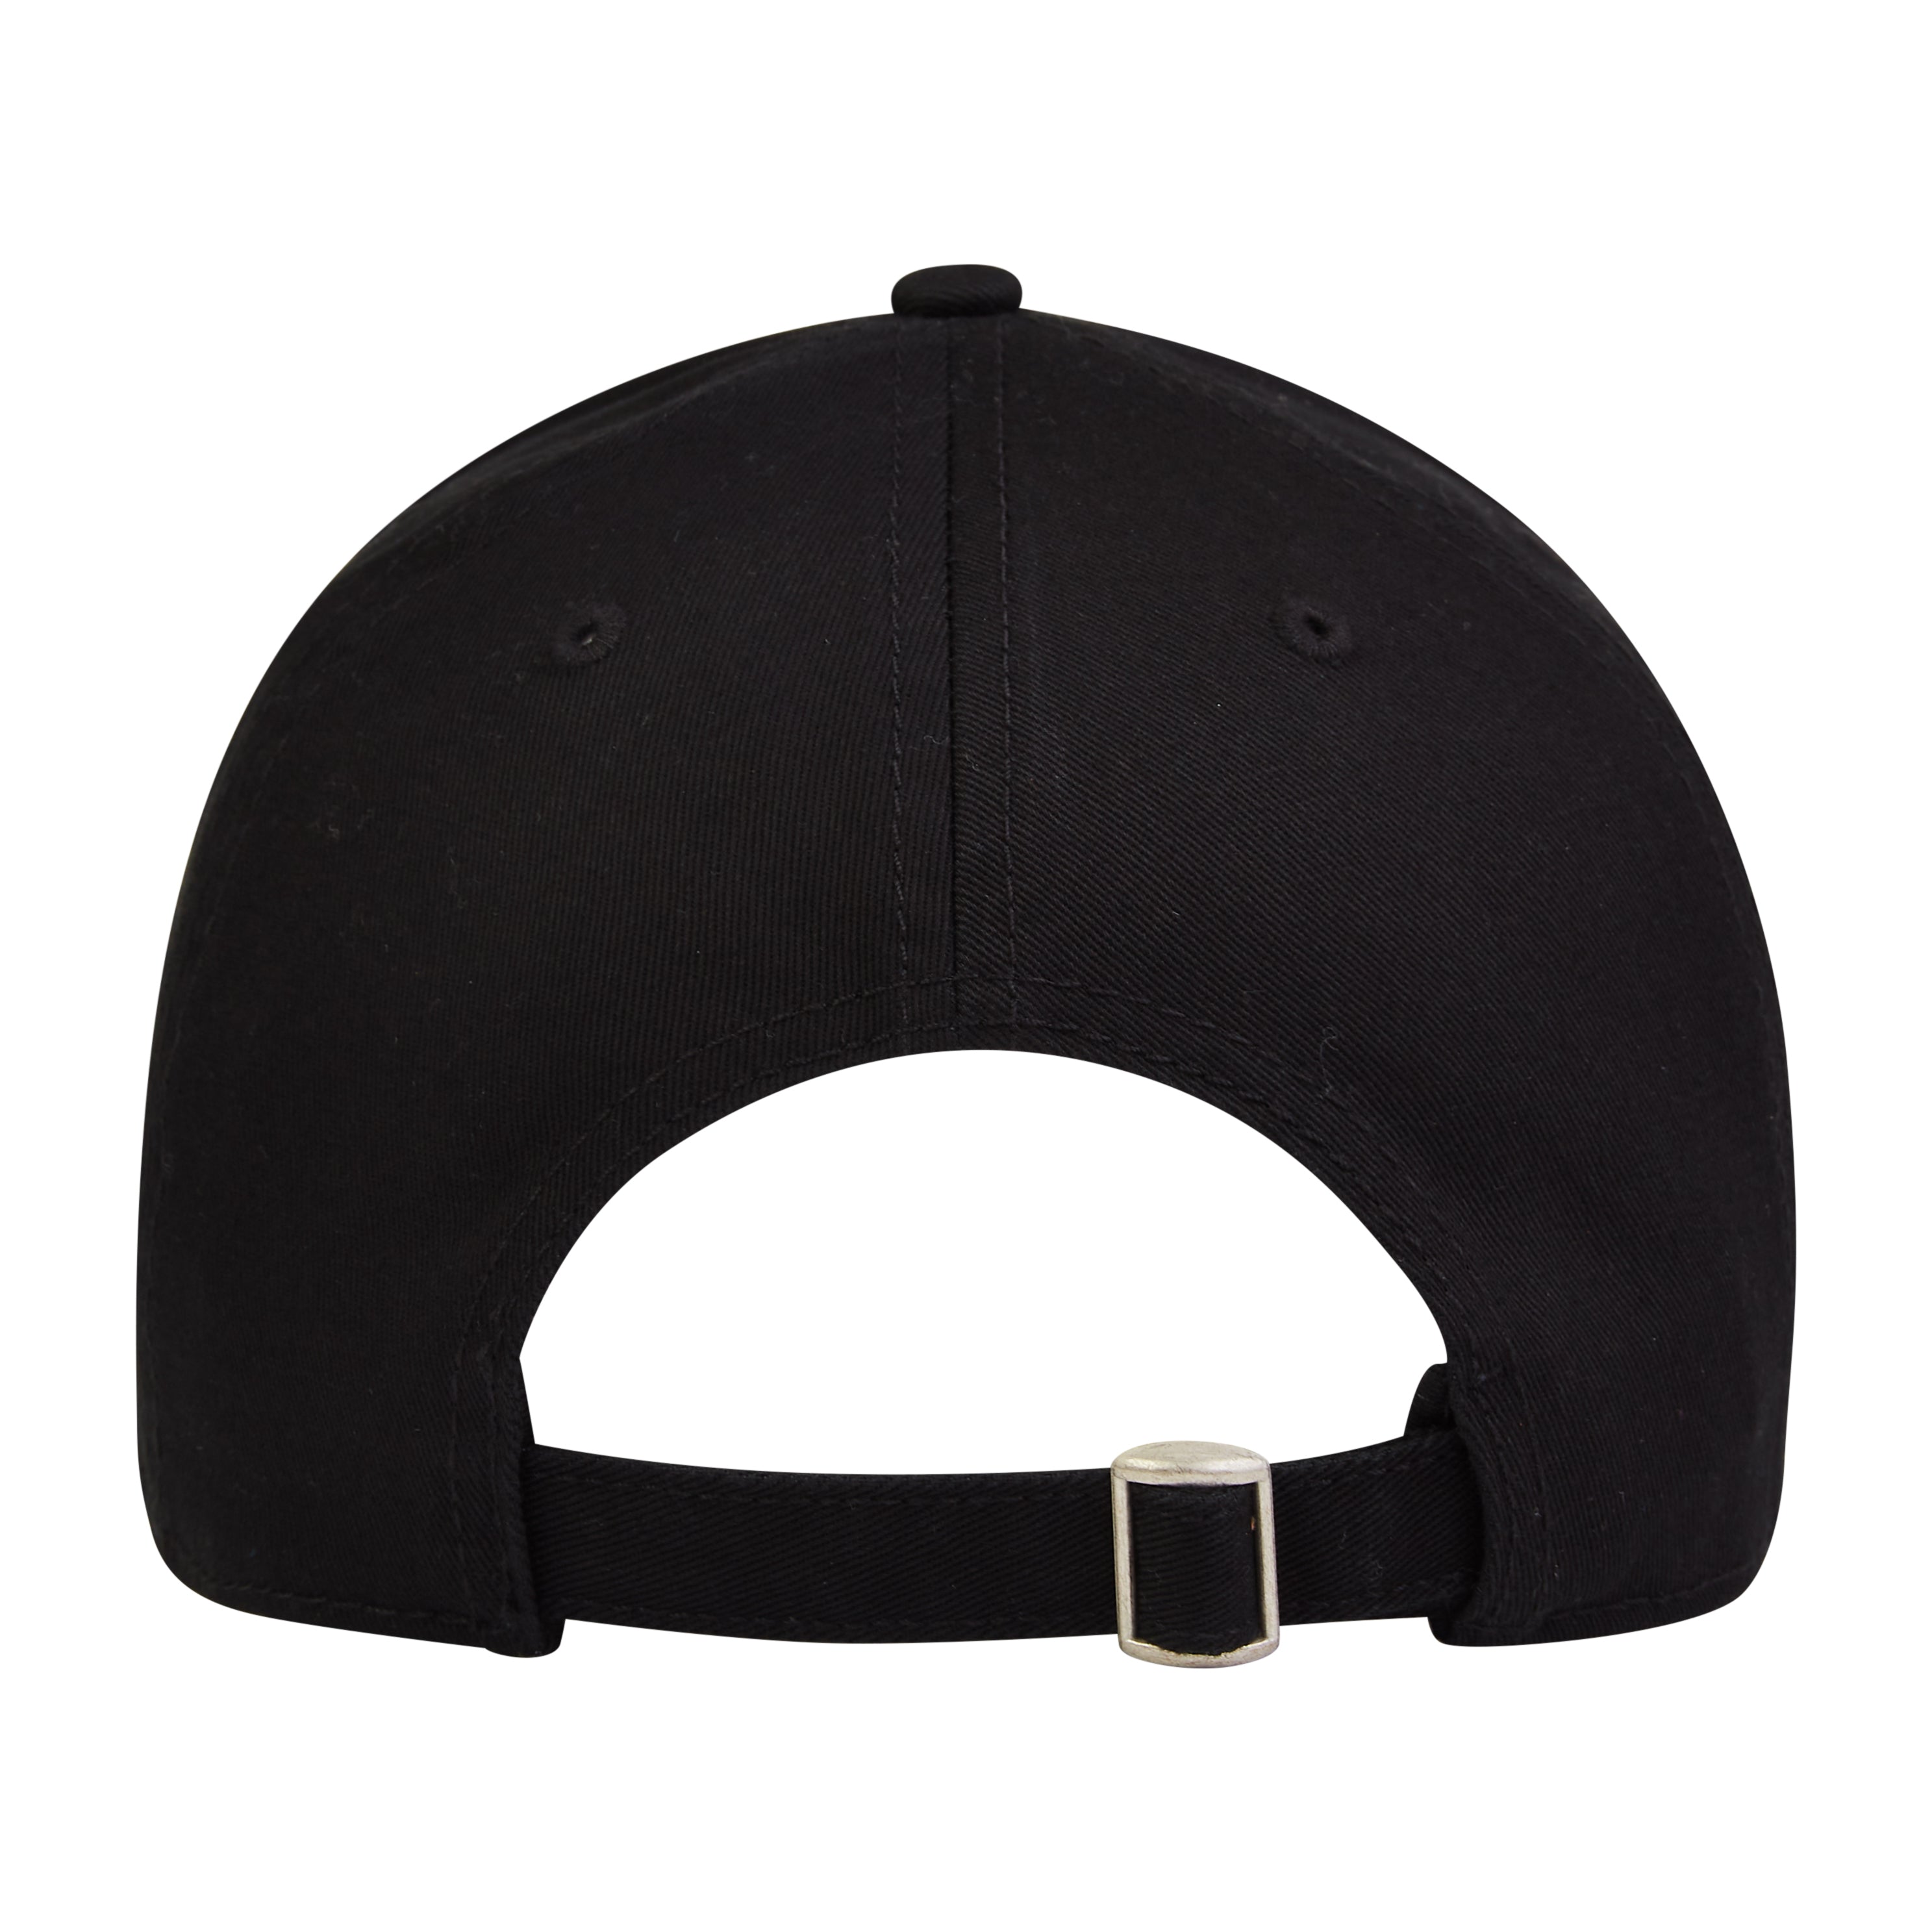 This is the back of the new standard 3d distressed 5 panel in black.  It's a large image of the rear of the hat showing the buckle and the strap on a white background